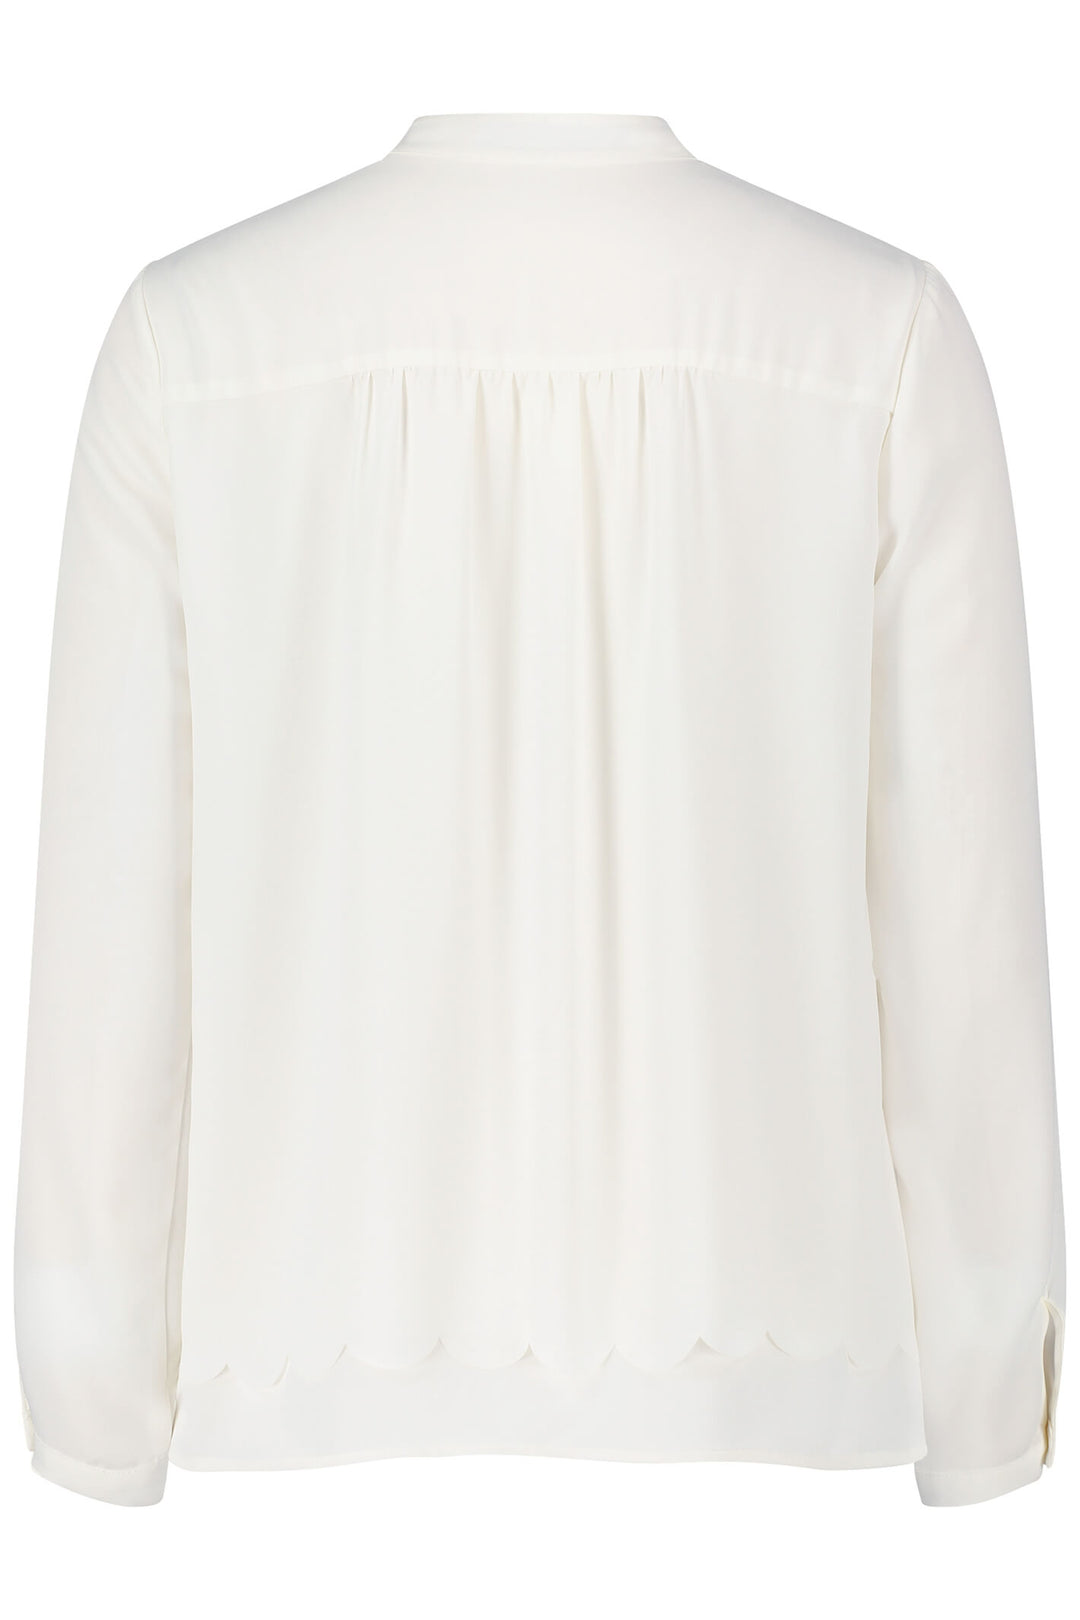 Betty Barclay 8616 2723 1014 Off White Blouse - Dotique Chesterfield